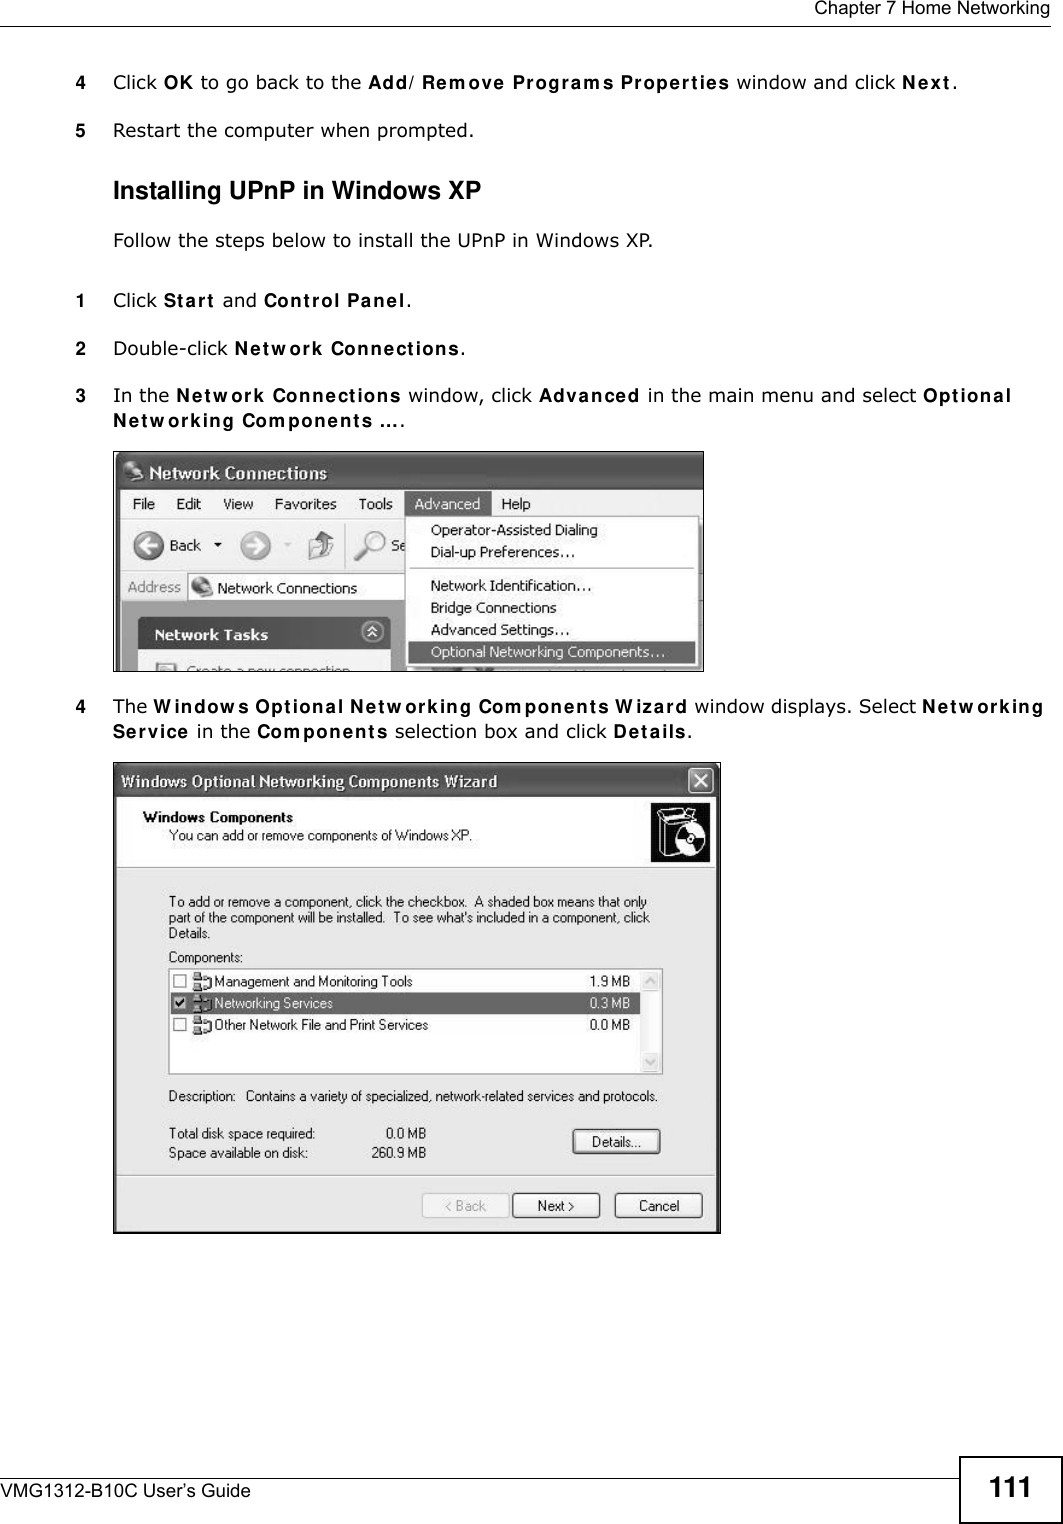  Chapter 7 Home NetworkingVMG1312-B10C User’s Guide 1114Click OK to go back to the Add/ Rem ove Pr ogr a m s Prope rt ie s window and click N e x t. 5Restart the computer when prompted. Installing UPnP in Windows XPFollow the steps below to install the UPnP in Windows XP.1Click St a r t  and Con t r ol Panel. 2Double-click N e t w ork  Con n e ctions.3In the N et w or k Connect ions window, click Adva nced in the main menu and select Opt ion a l N e t w or k in g Com ponent s …. Network Co nnections4The W indow s Opt iona l N e t w ork ing Com ponent s W izar d window displays. Select N et w or king Service in the Com pon e n t s selection box and click D et a ils. Windows Optional Networking Components Wizard